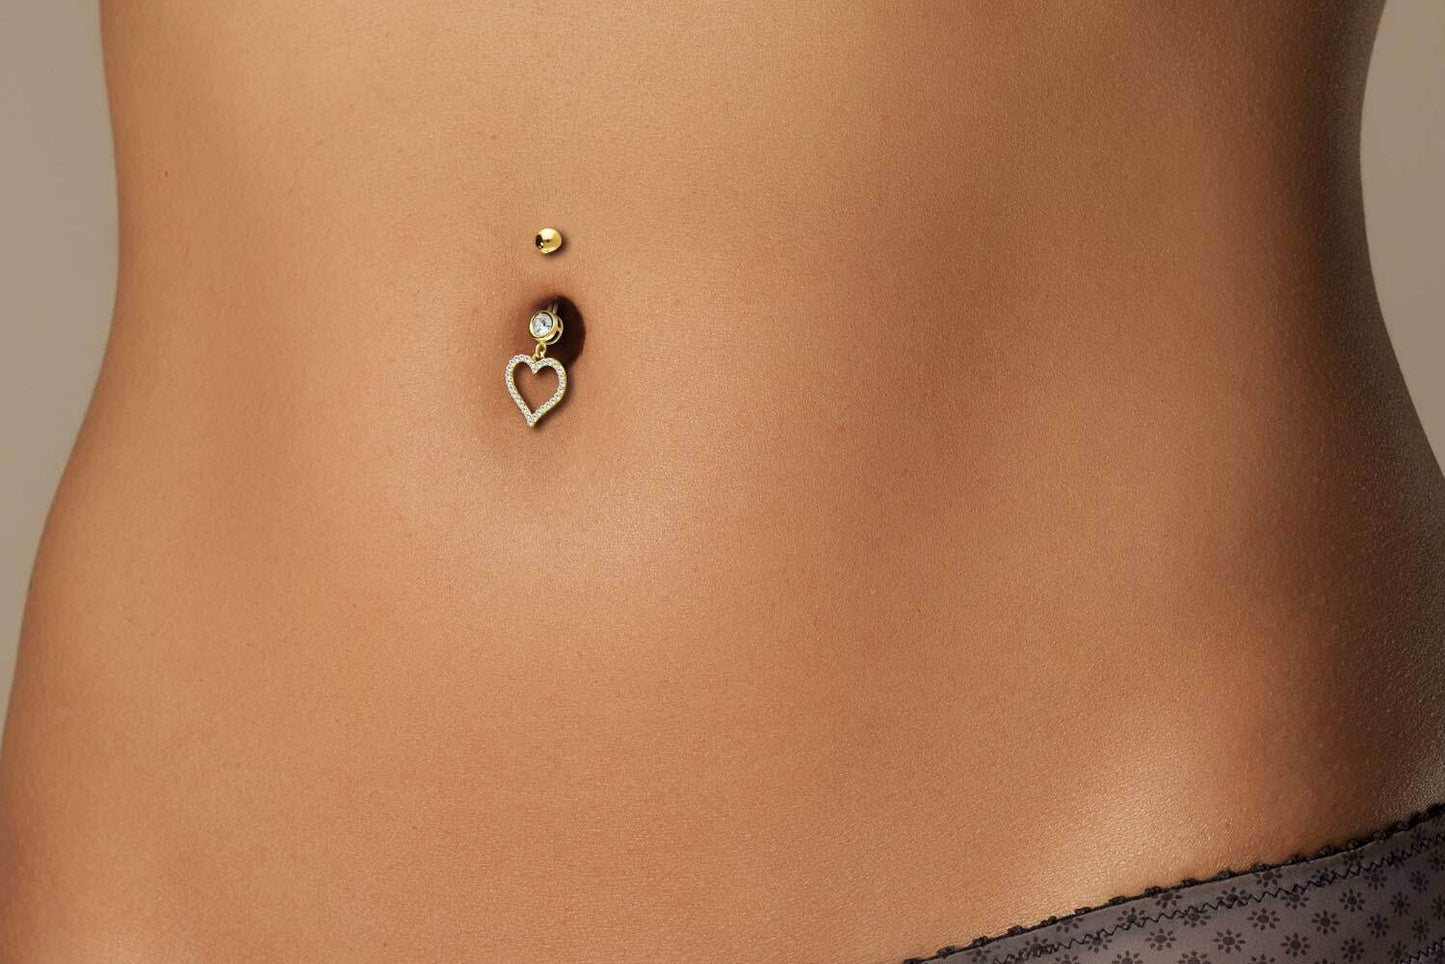 Solid Gold 18 Carat Belly Button Piercing Heart dangle Zirconia